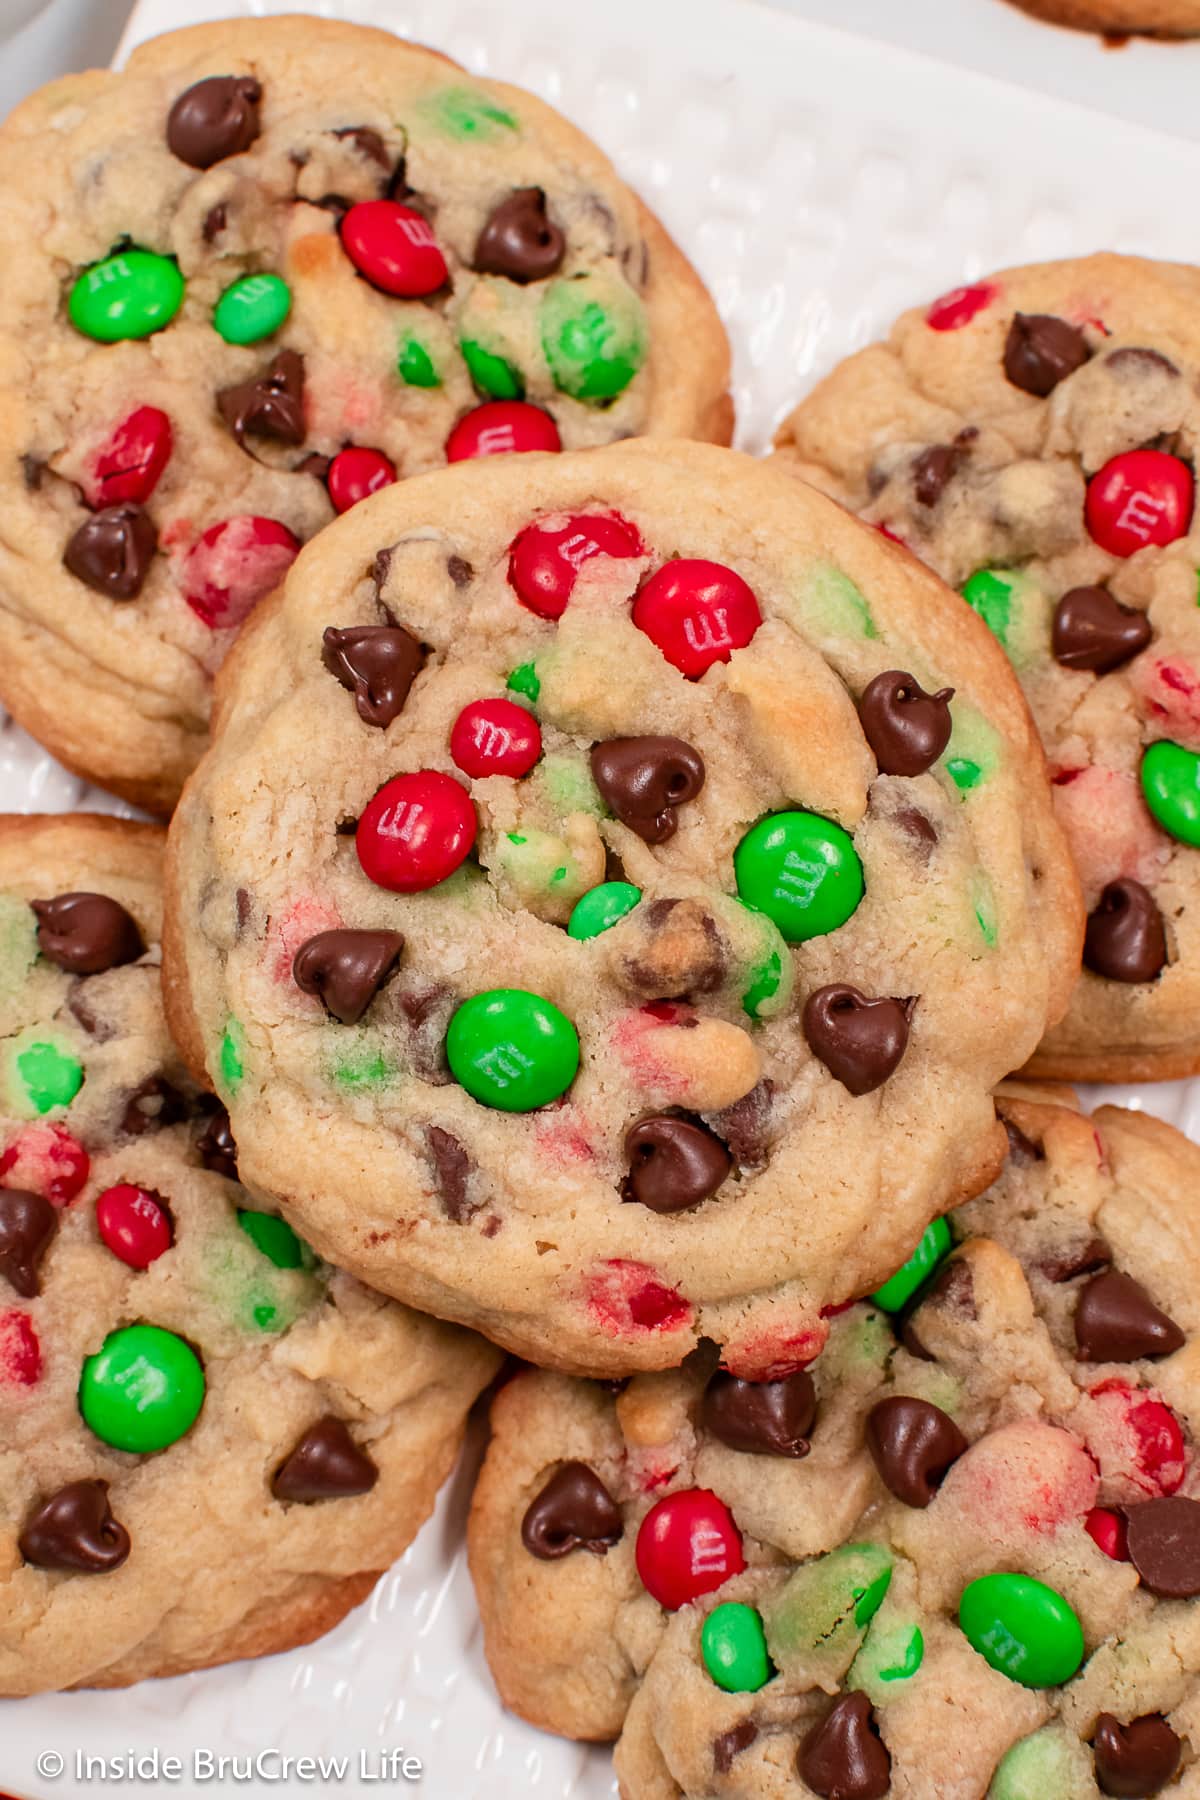 A close up of a holiday cookie with red and green candies.